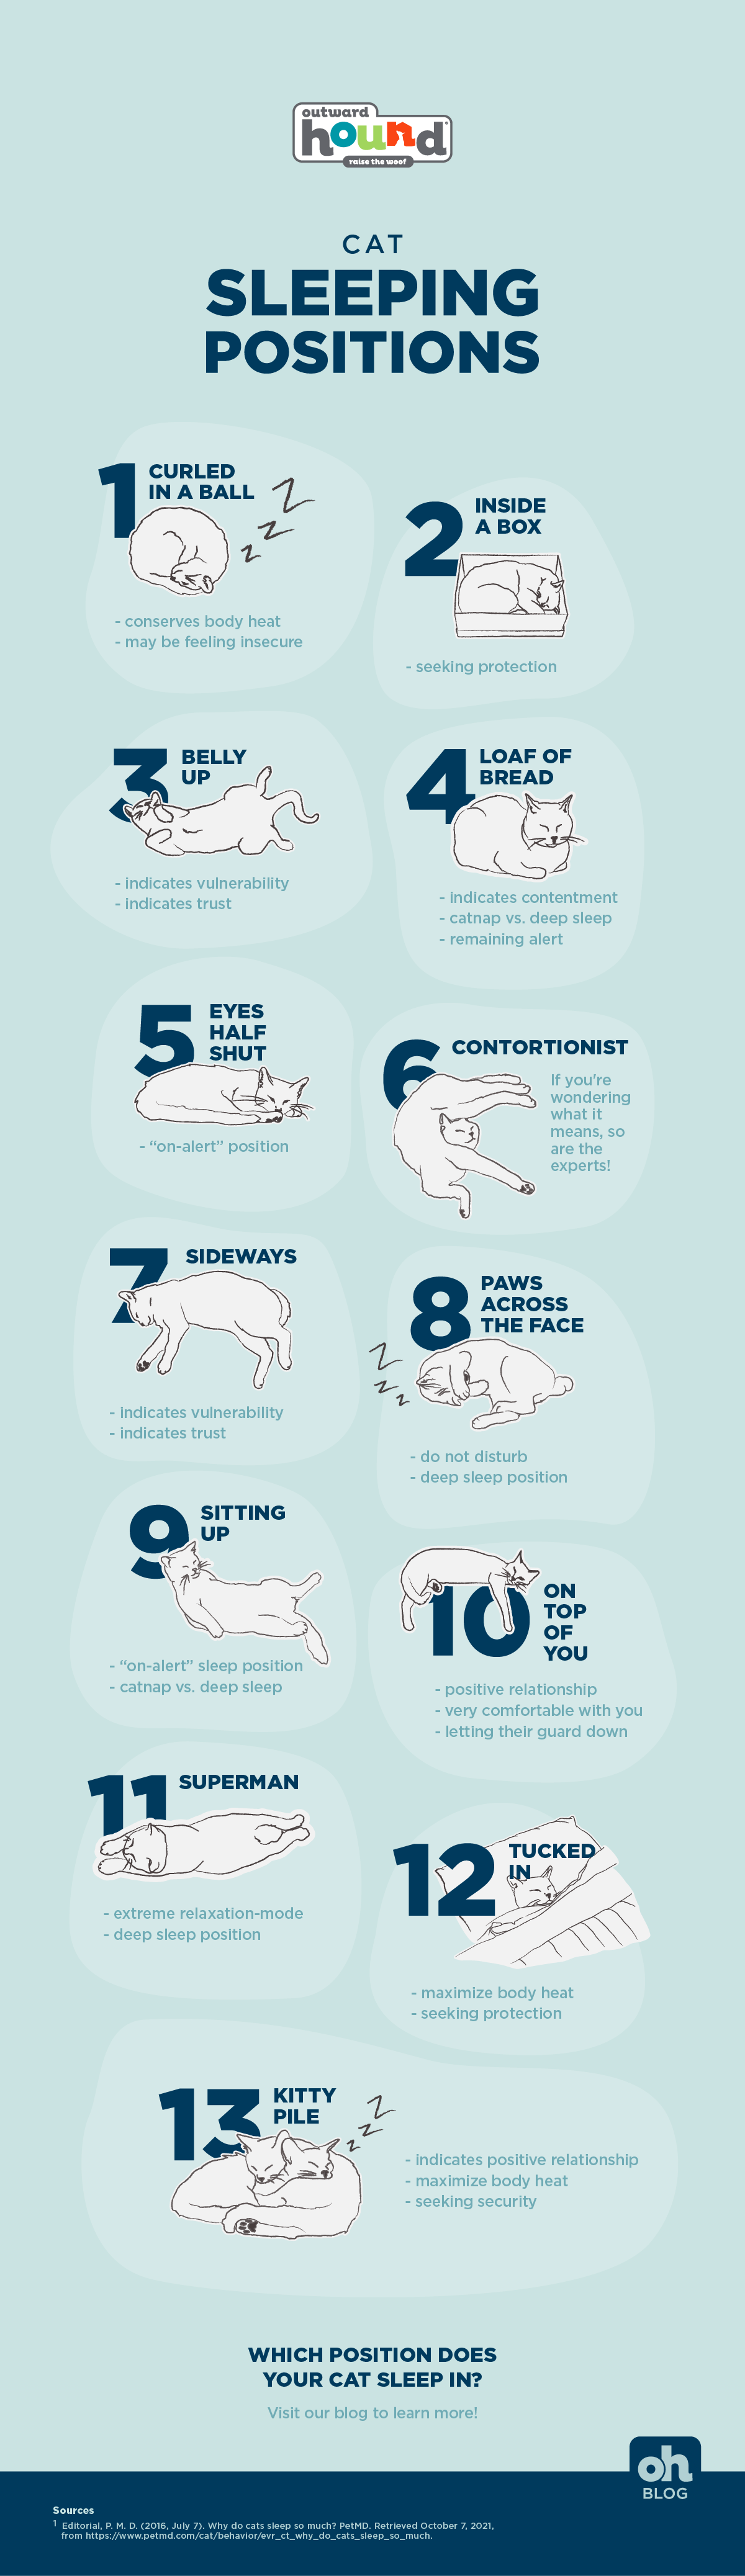 cat sleeping positions infographic